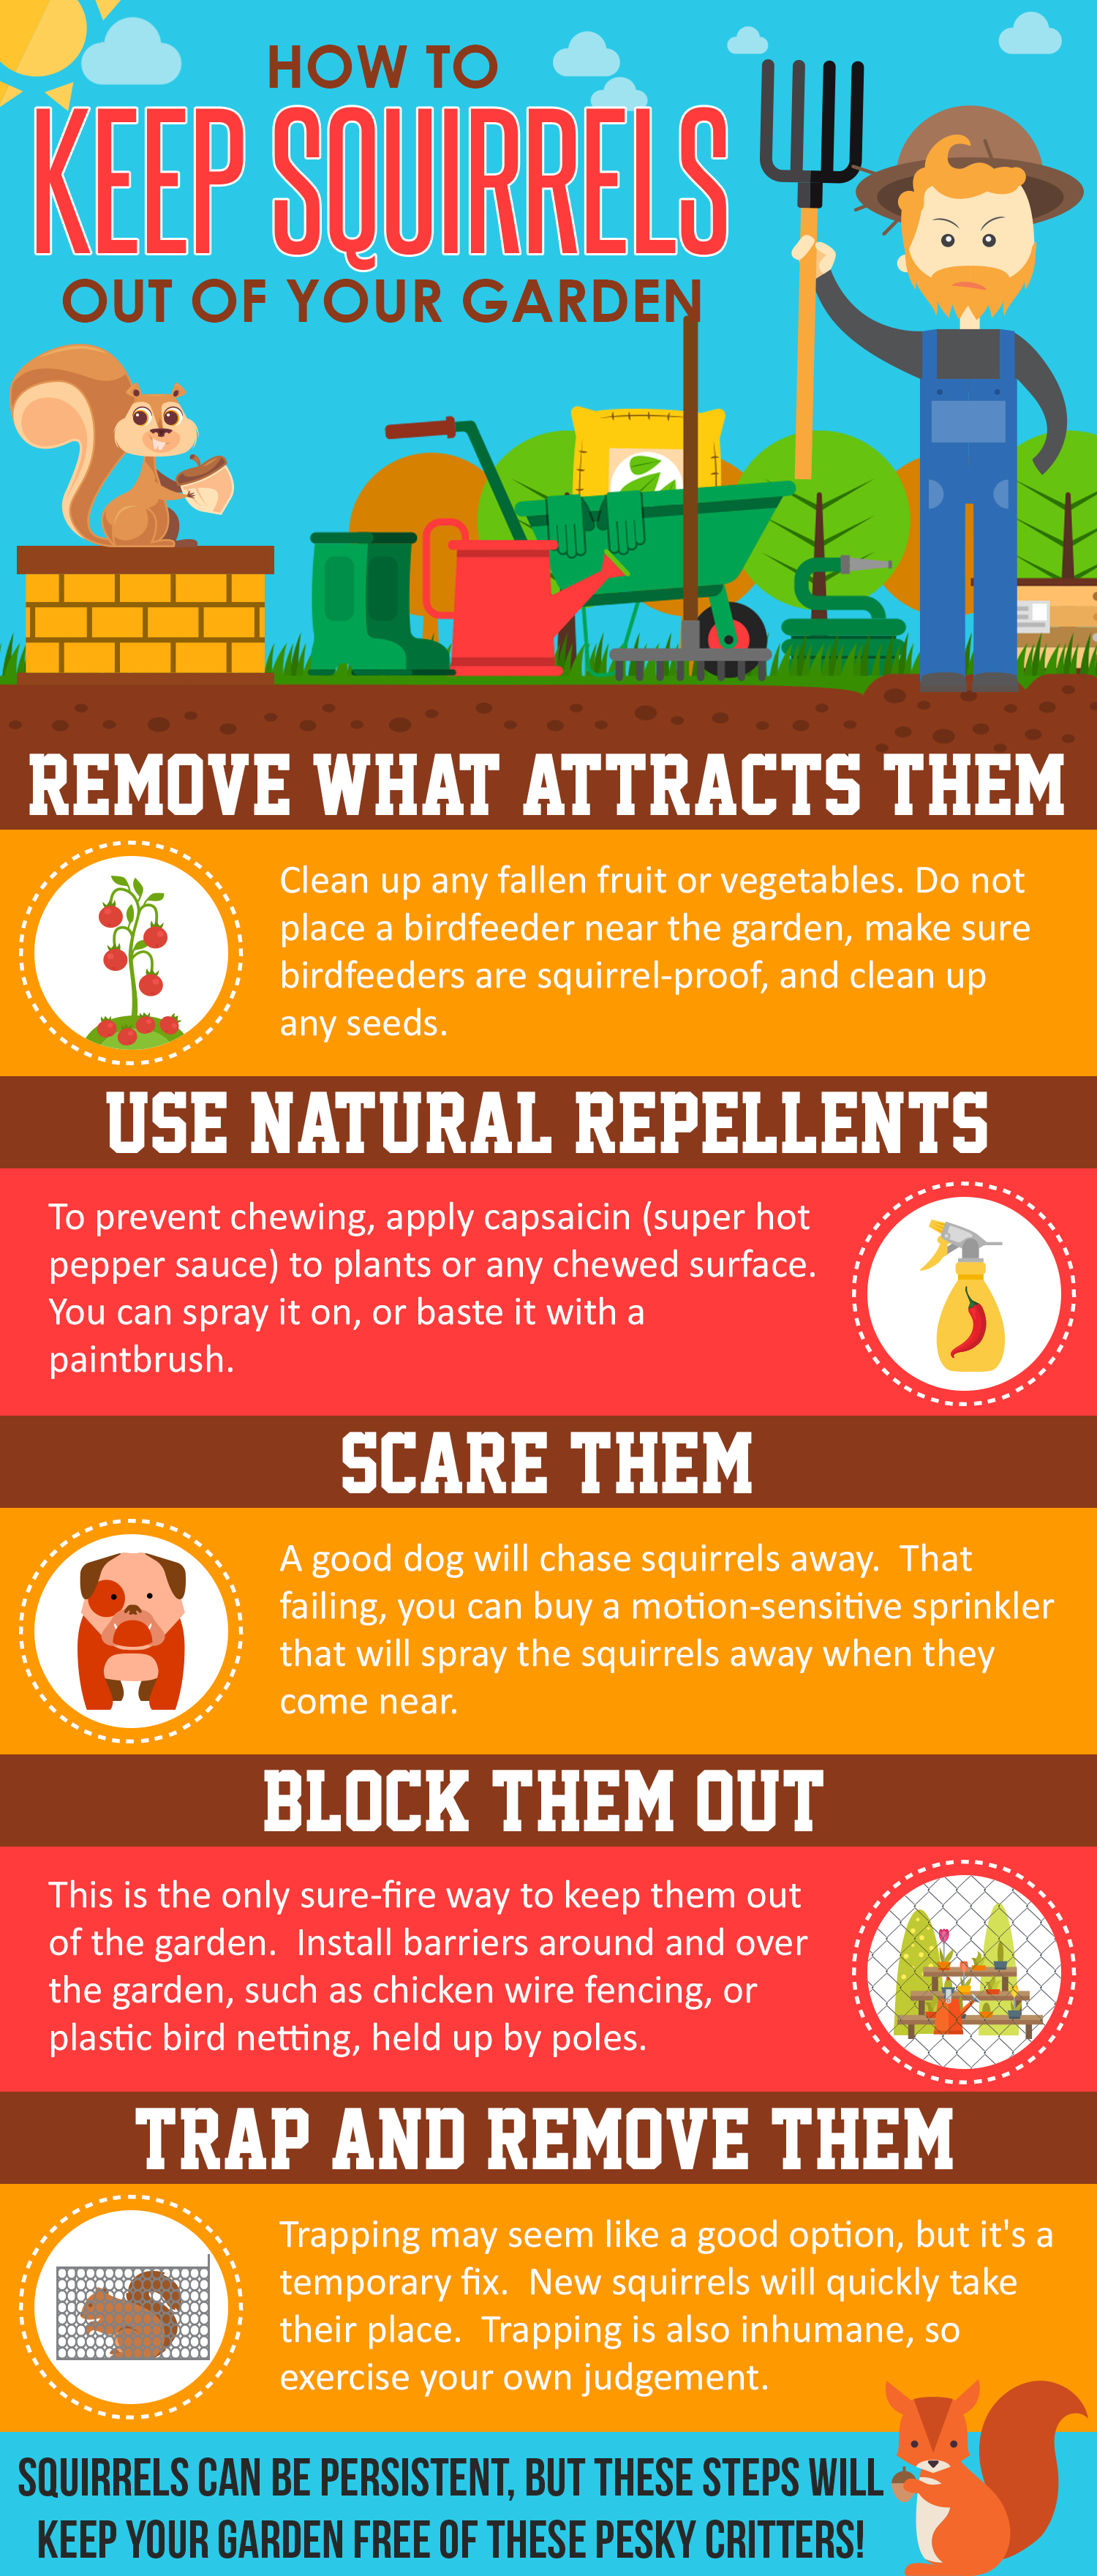 How To Keep Squirrels Out Of My Garden Infographic